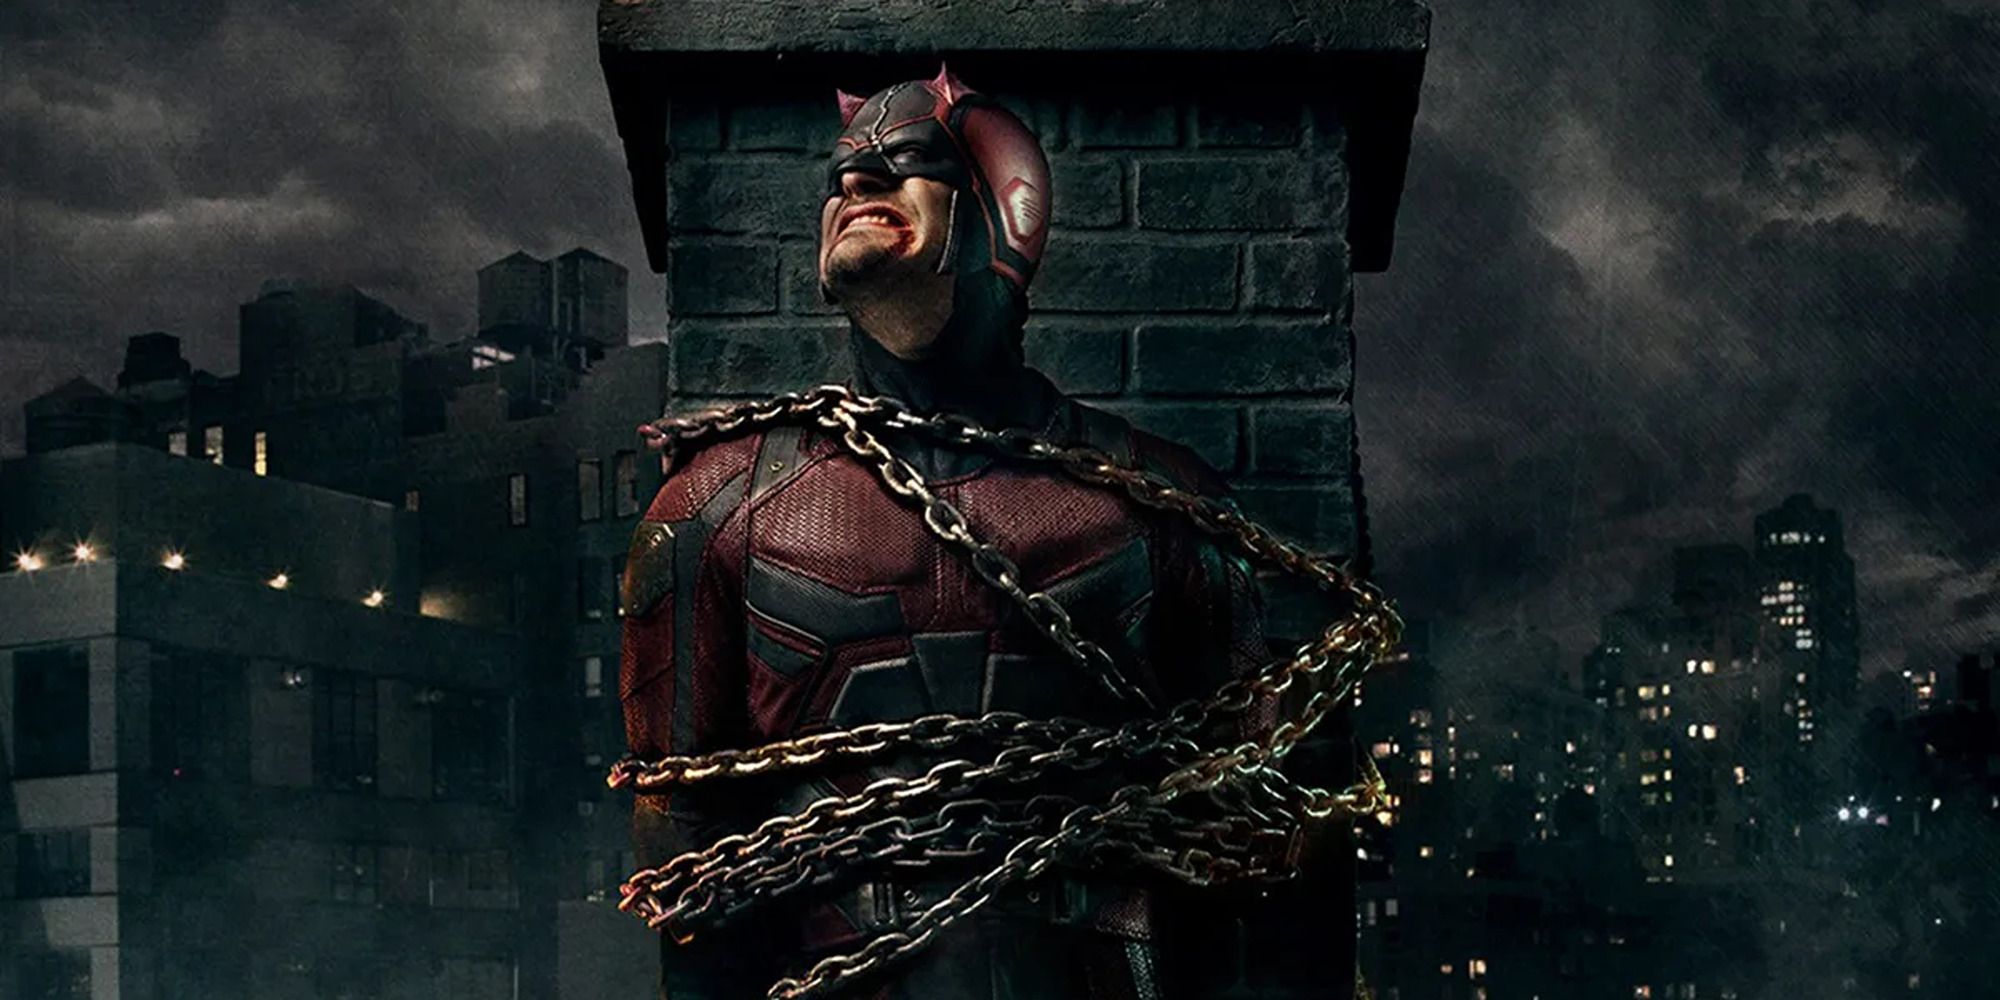 Daredevil tied up to a brick chimney with metal chains on the poster for Season 2 of Netflix's Daredevil